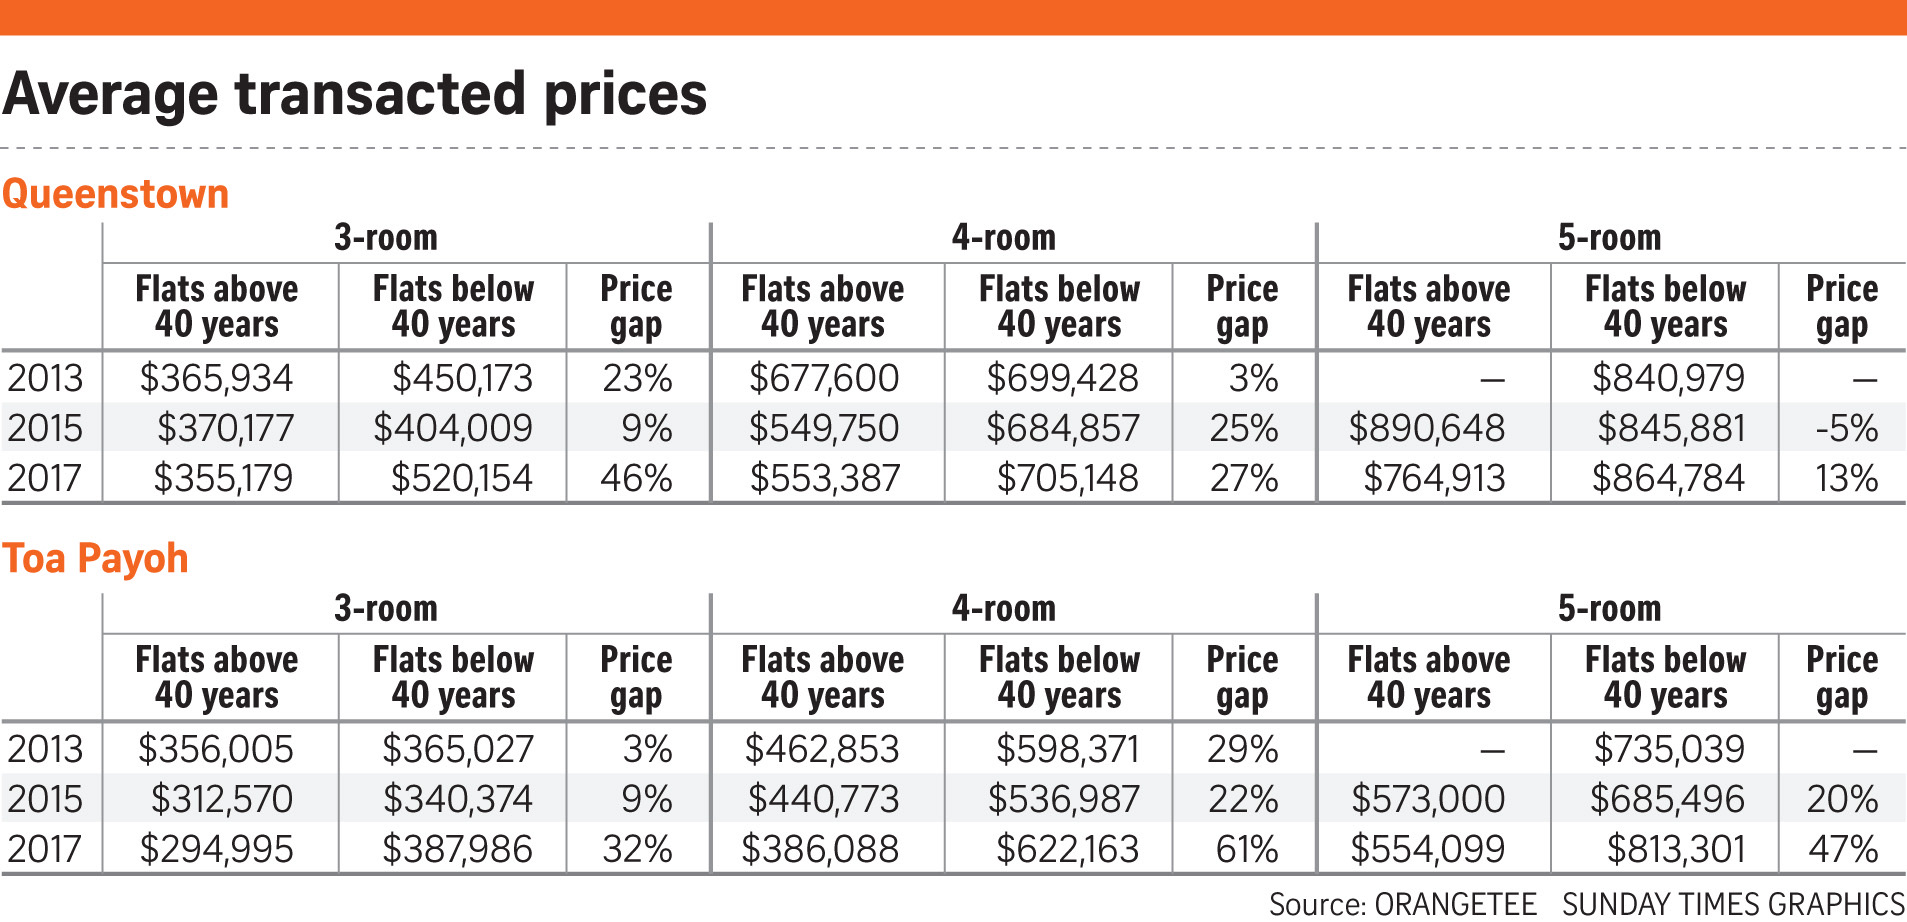 180415 TABLE HDB flats Toa Payoh Average transacted prices Queenstown